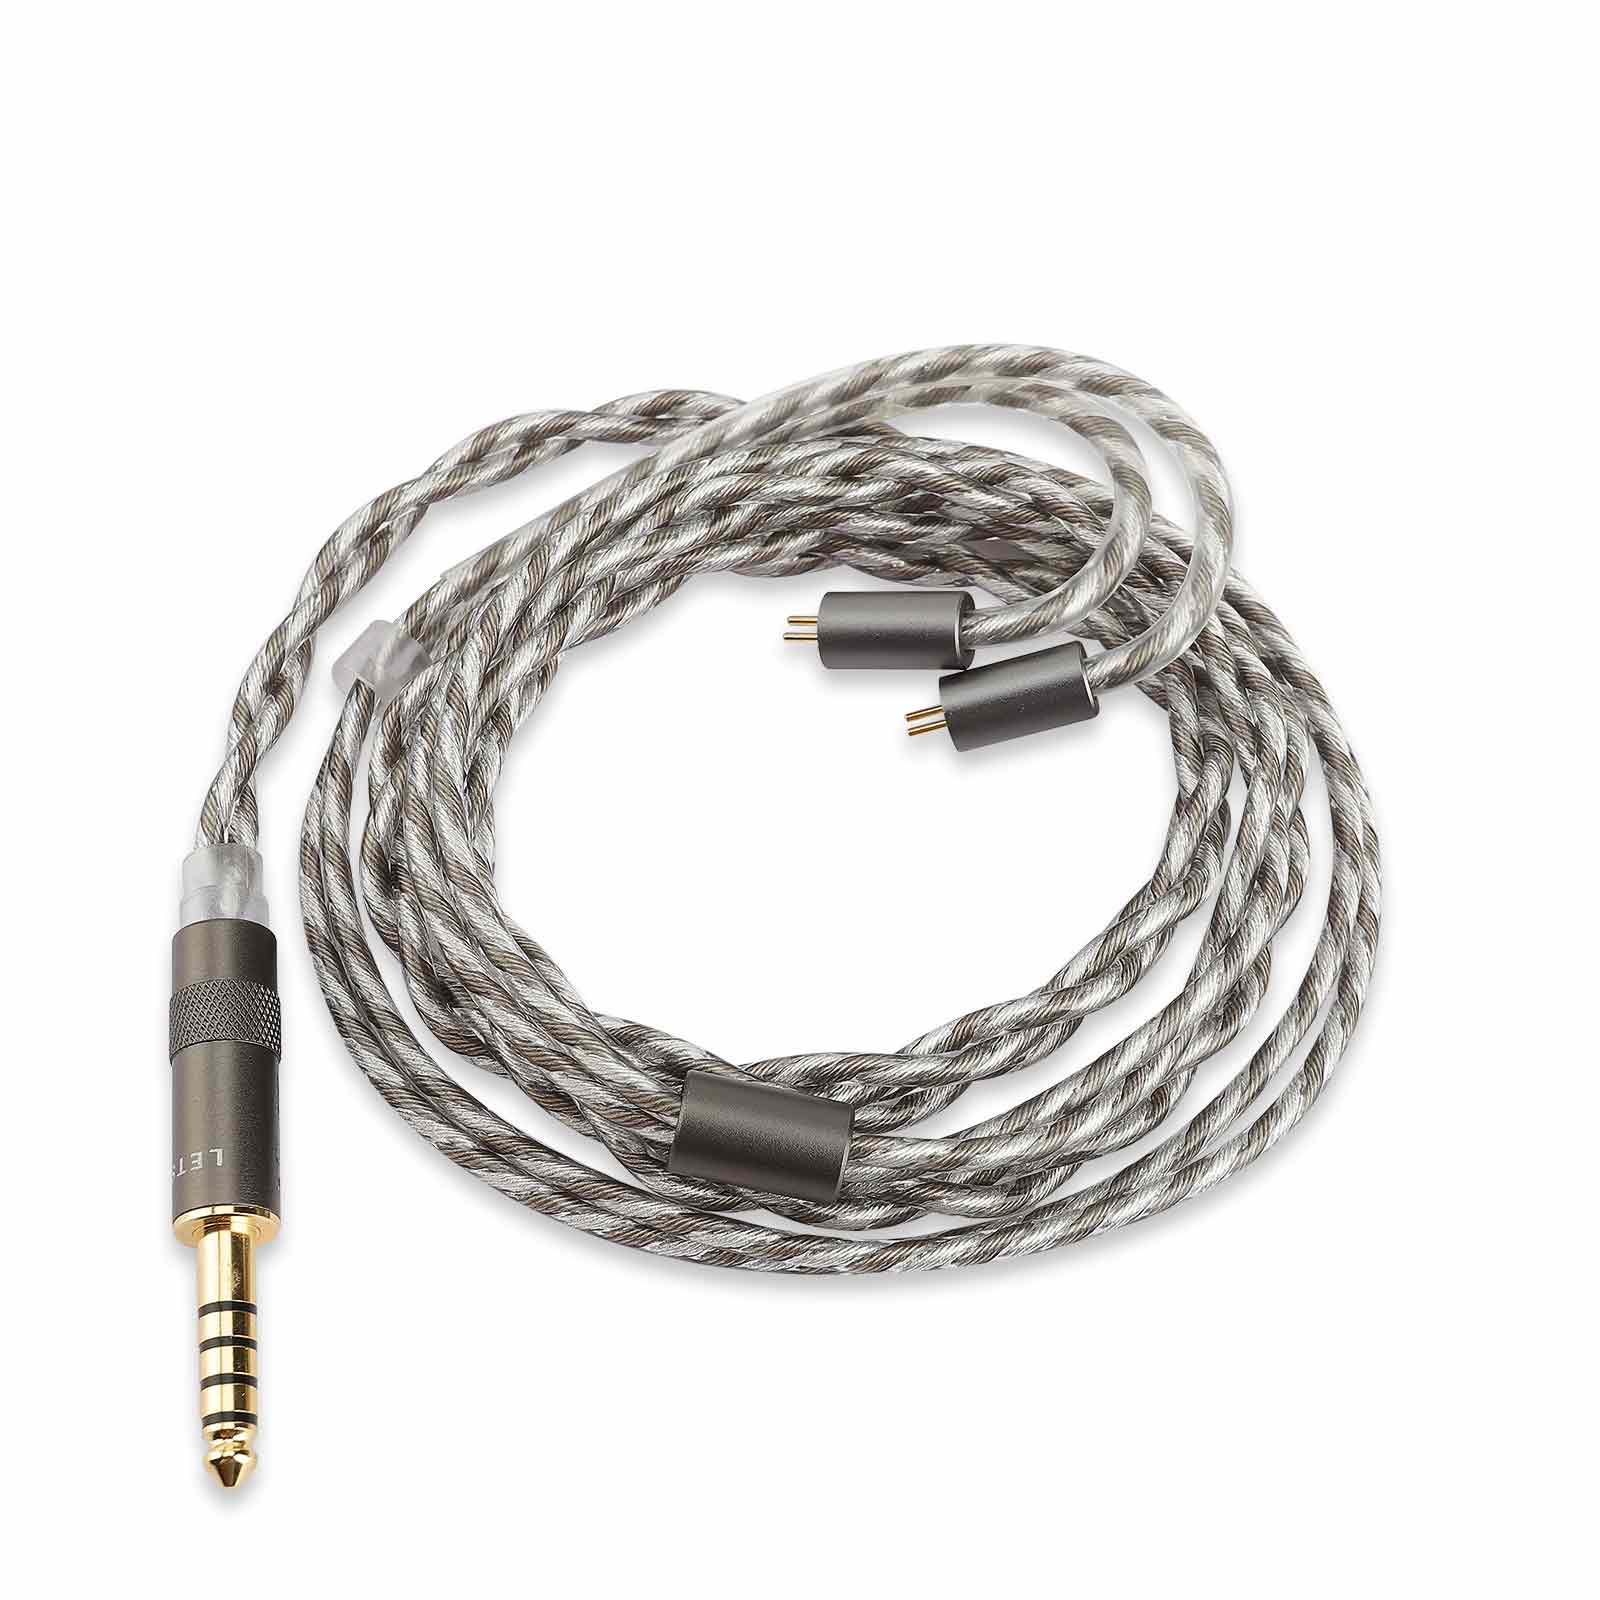 LETSHUOER M5-Standard S12 audio 3.5mm cable or 4.4mm balanced